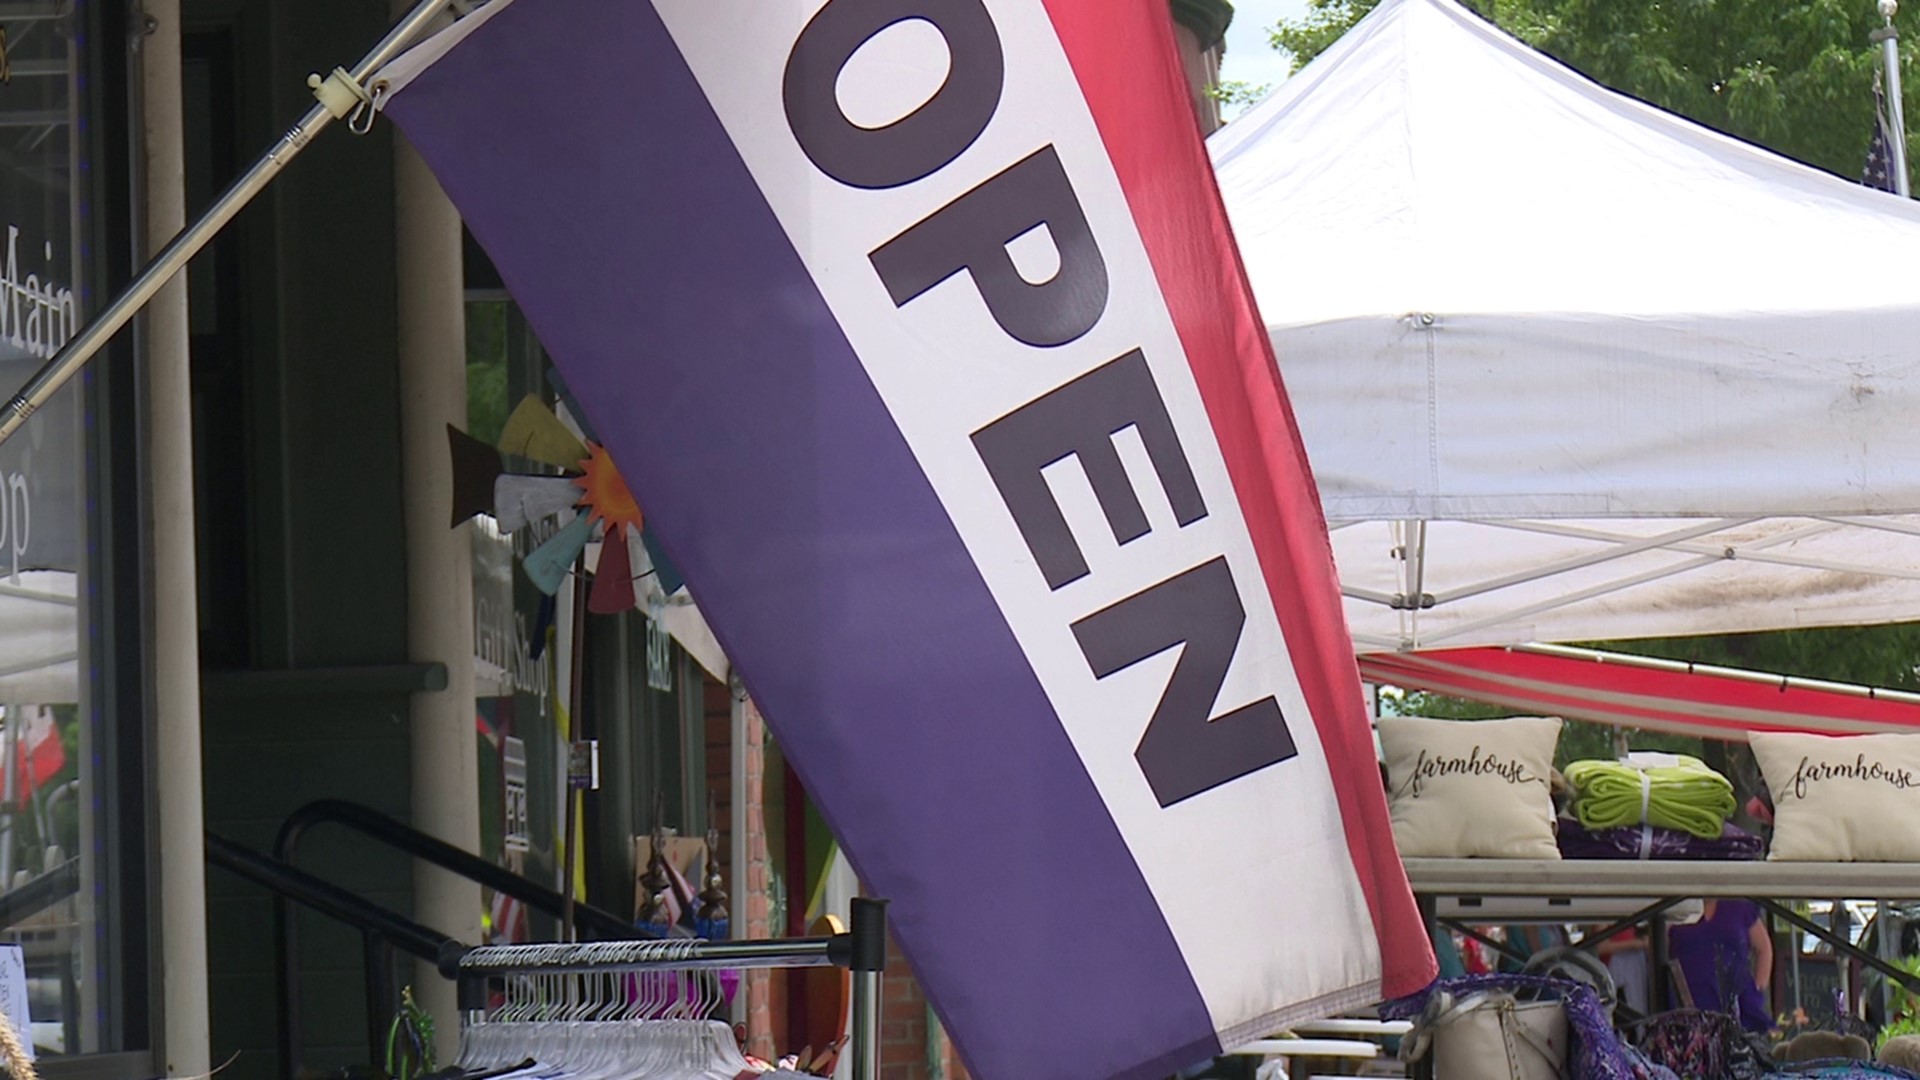 Honesdale is having another year of sidewalk sales that sees many new faces come to the area.